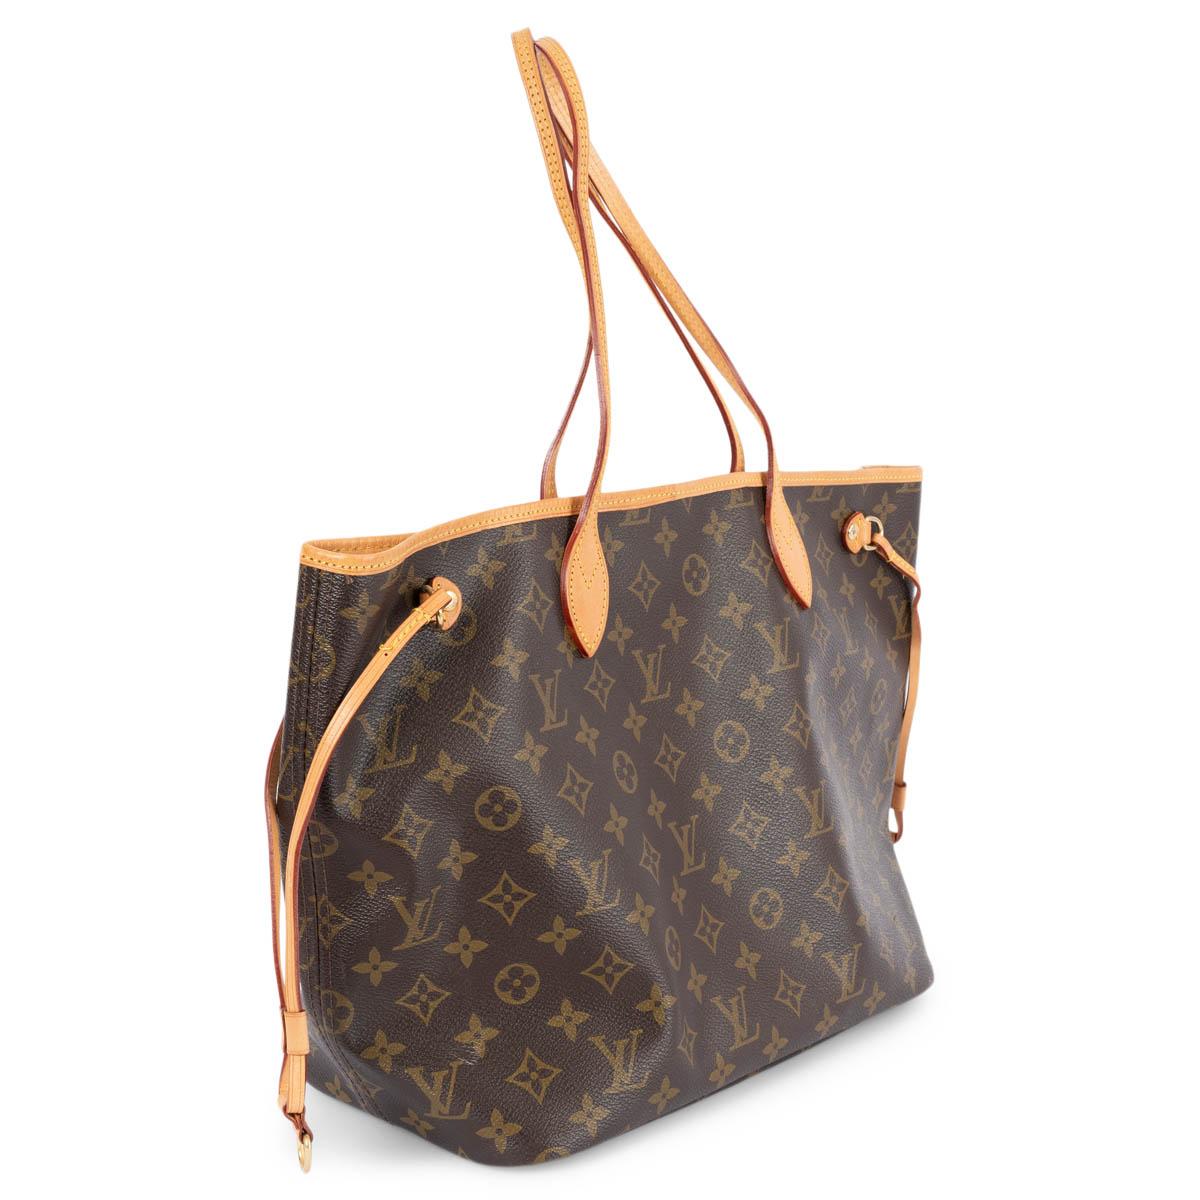 100% authentic Louis Vuitton Nerverfull MM shopper in brown monogram canvas with natural leather trim. Lined in beige striped canvas with one zipper pocket against the back. Has been carried and shows some soft marks on the lining. Pouch is missing.